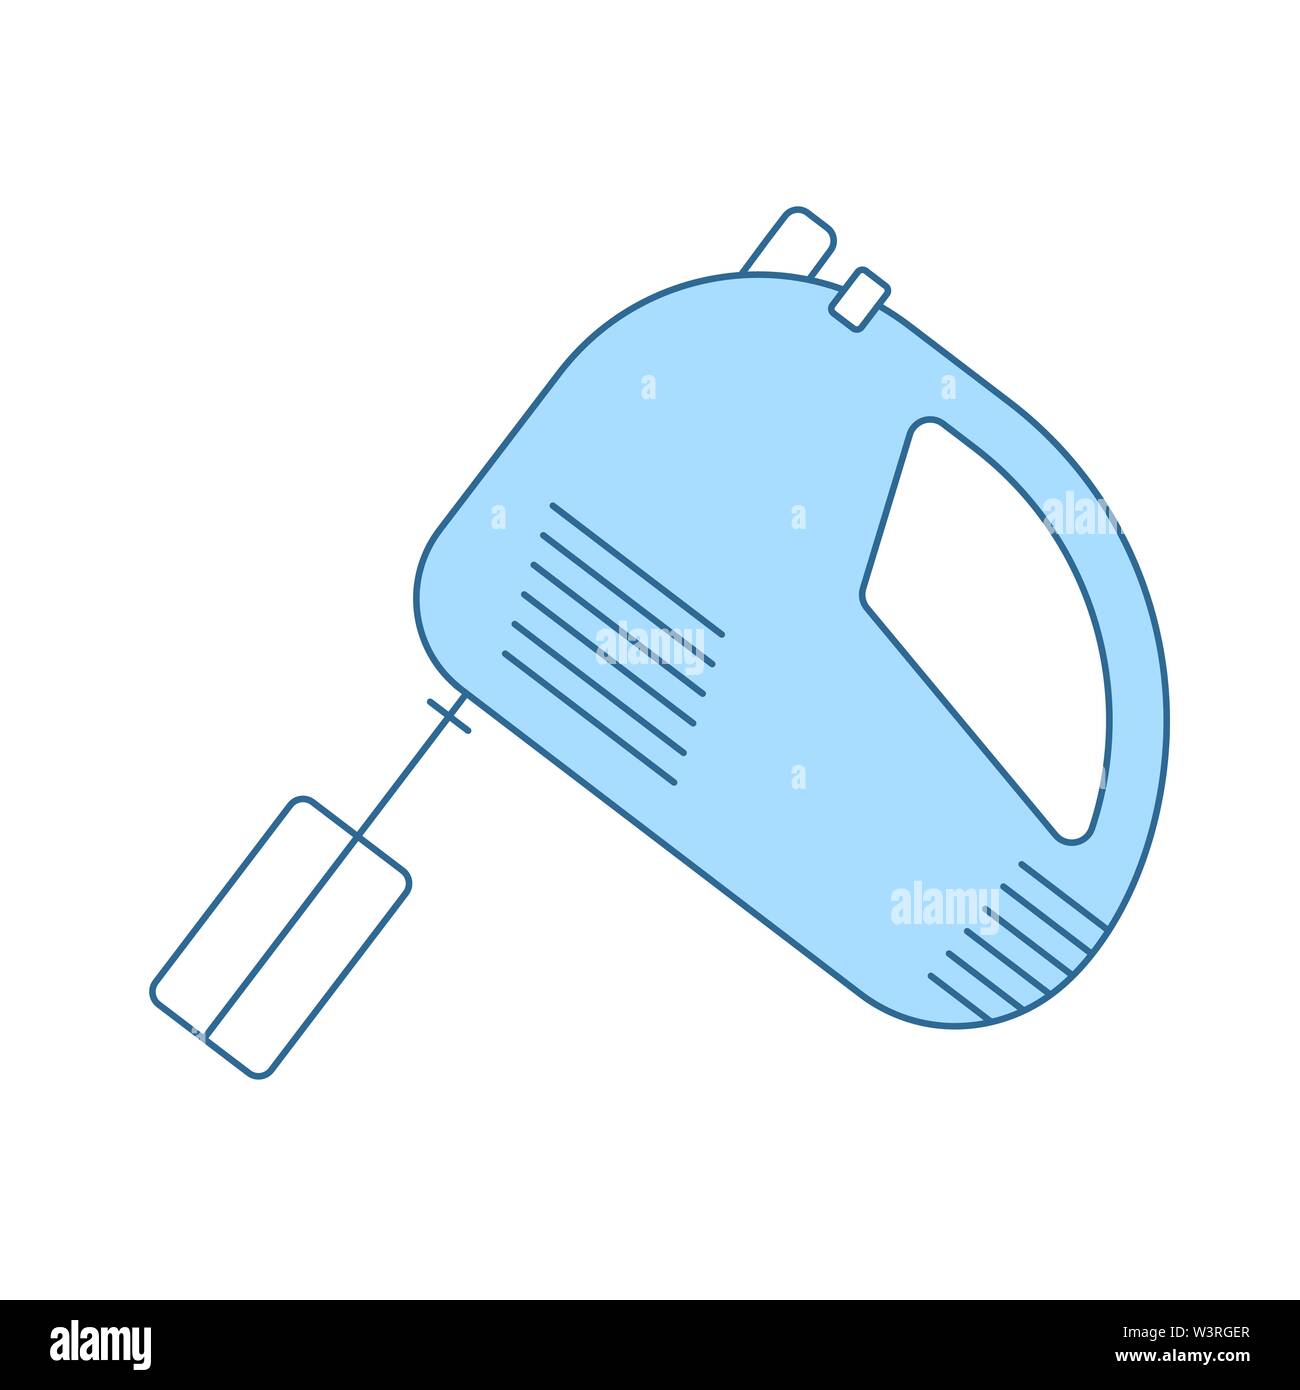 Kitchen Hand Mixer Icon. Thin Line With Blue Fill Design. Vector Illustration. Stock Vector